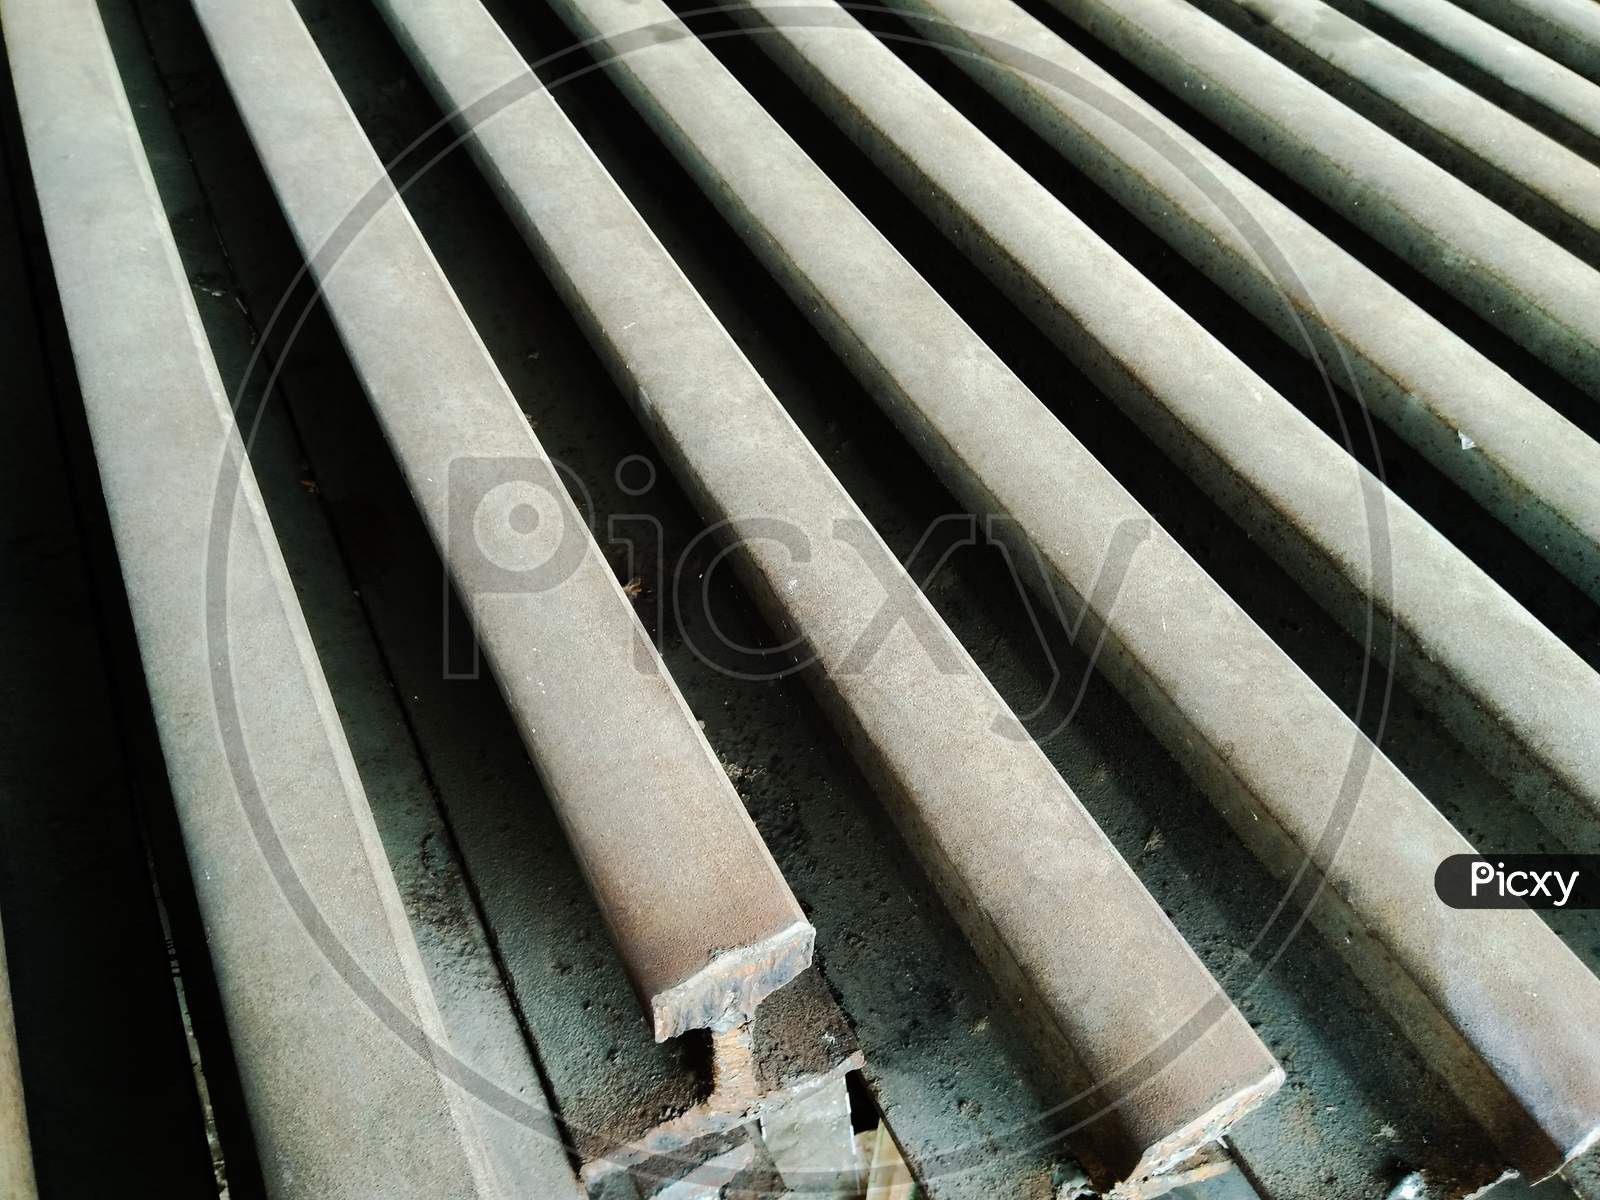 Iron Bars of Indian Railway  Tracks At an Railway Station Compound